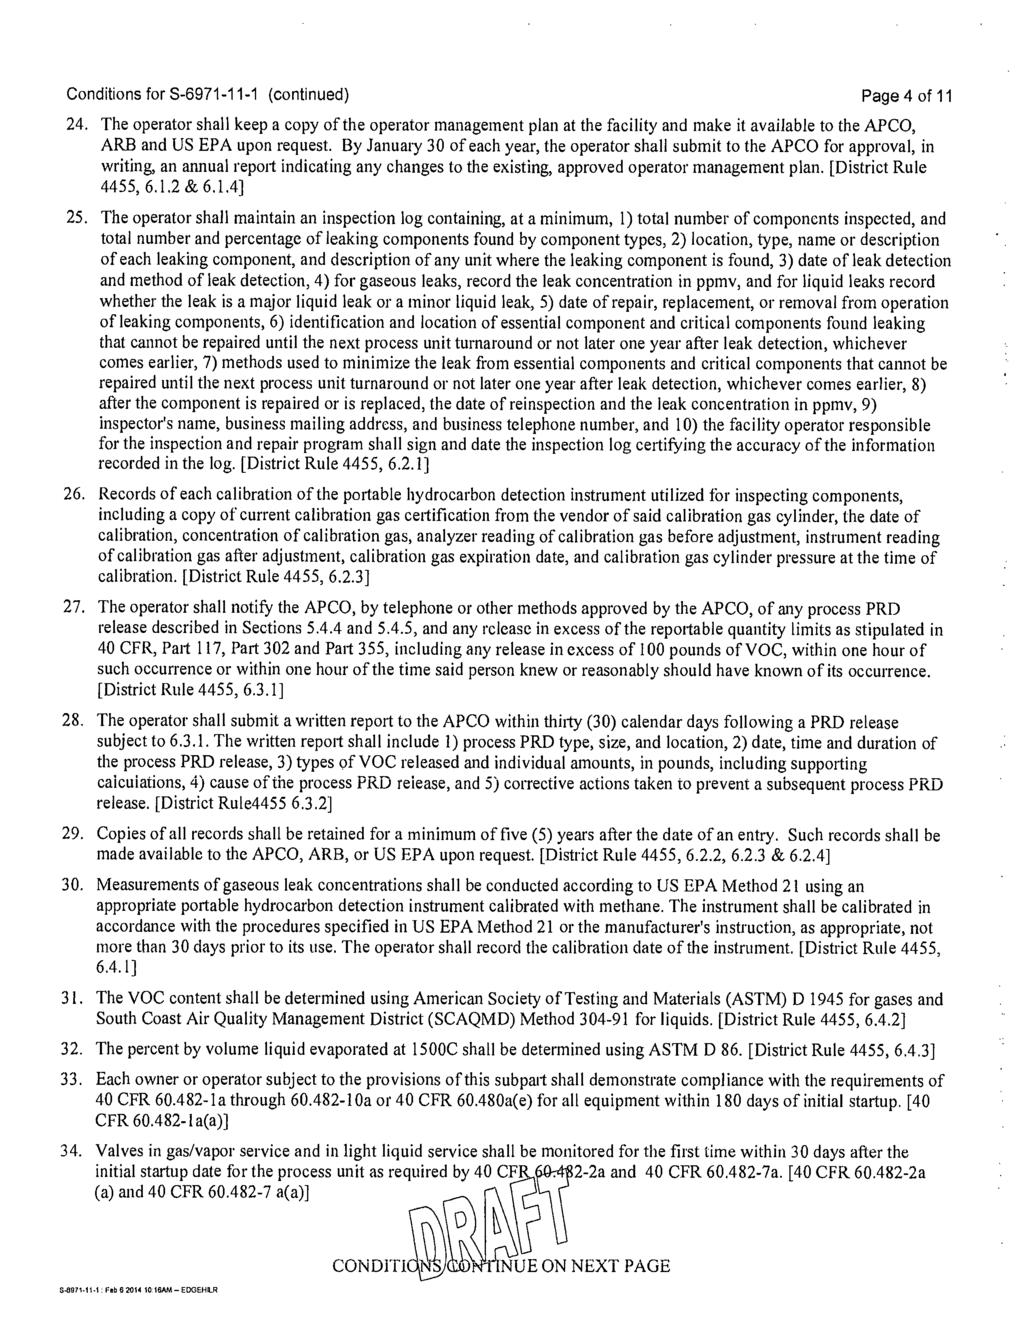 Conditions for S-6971-11-1 (continued) Page 4 of 11 24. The operator shall keep a copy of the operator management plan at the facility and make it available to the APCO, ARB and US EPA upon request.